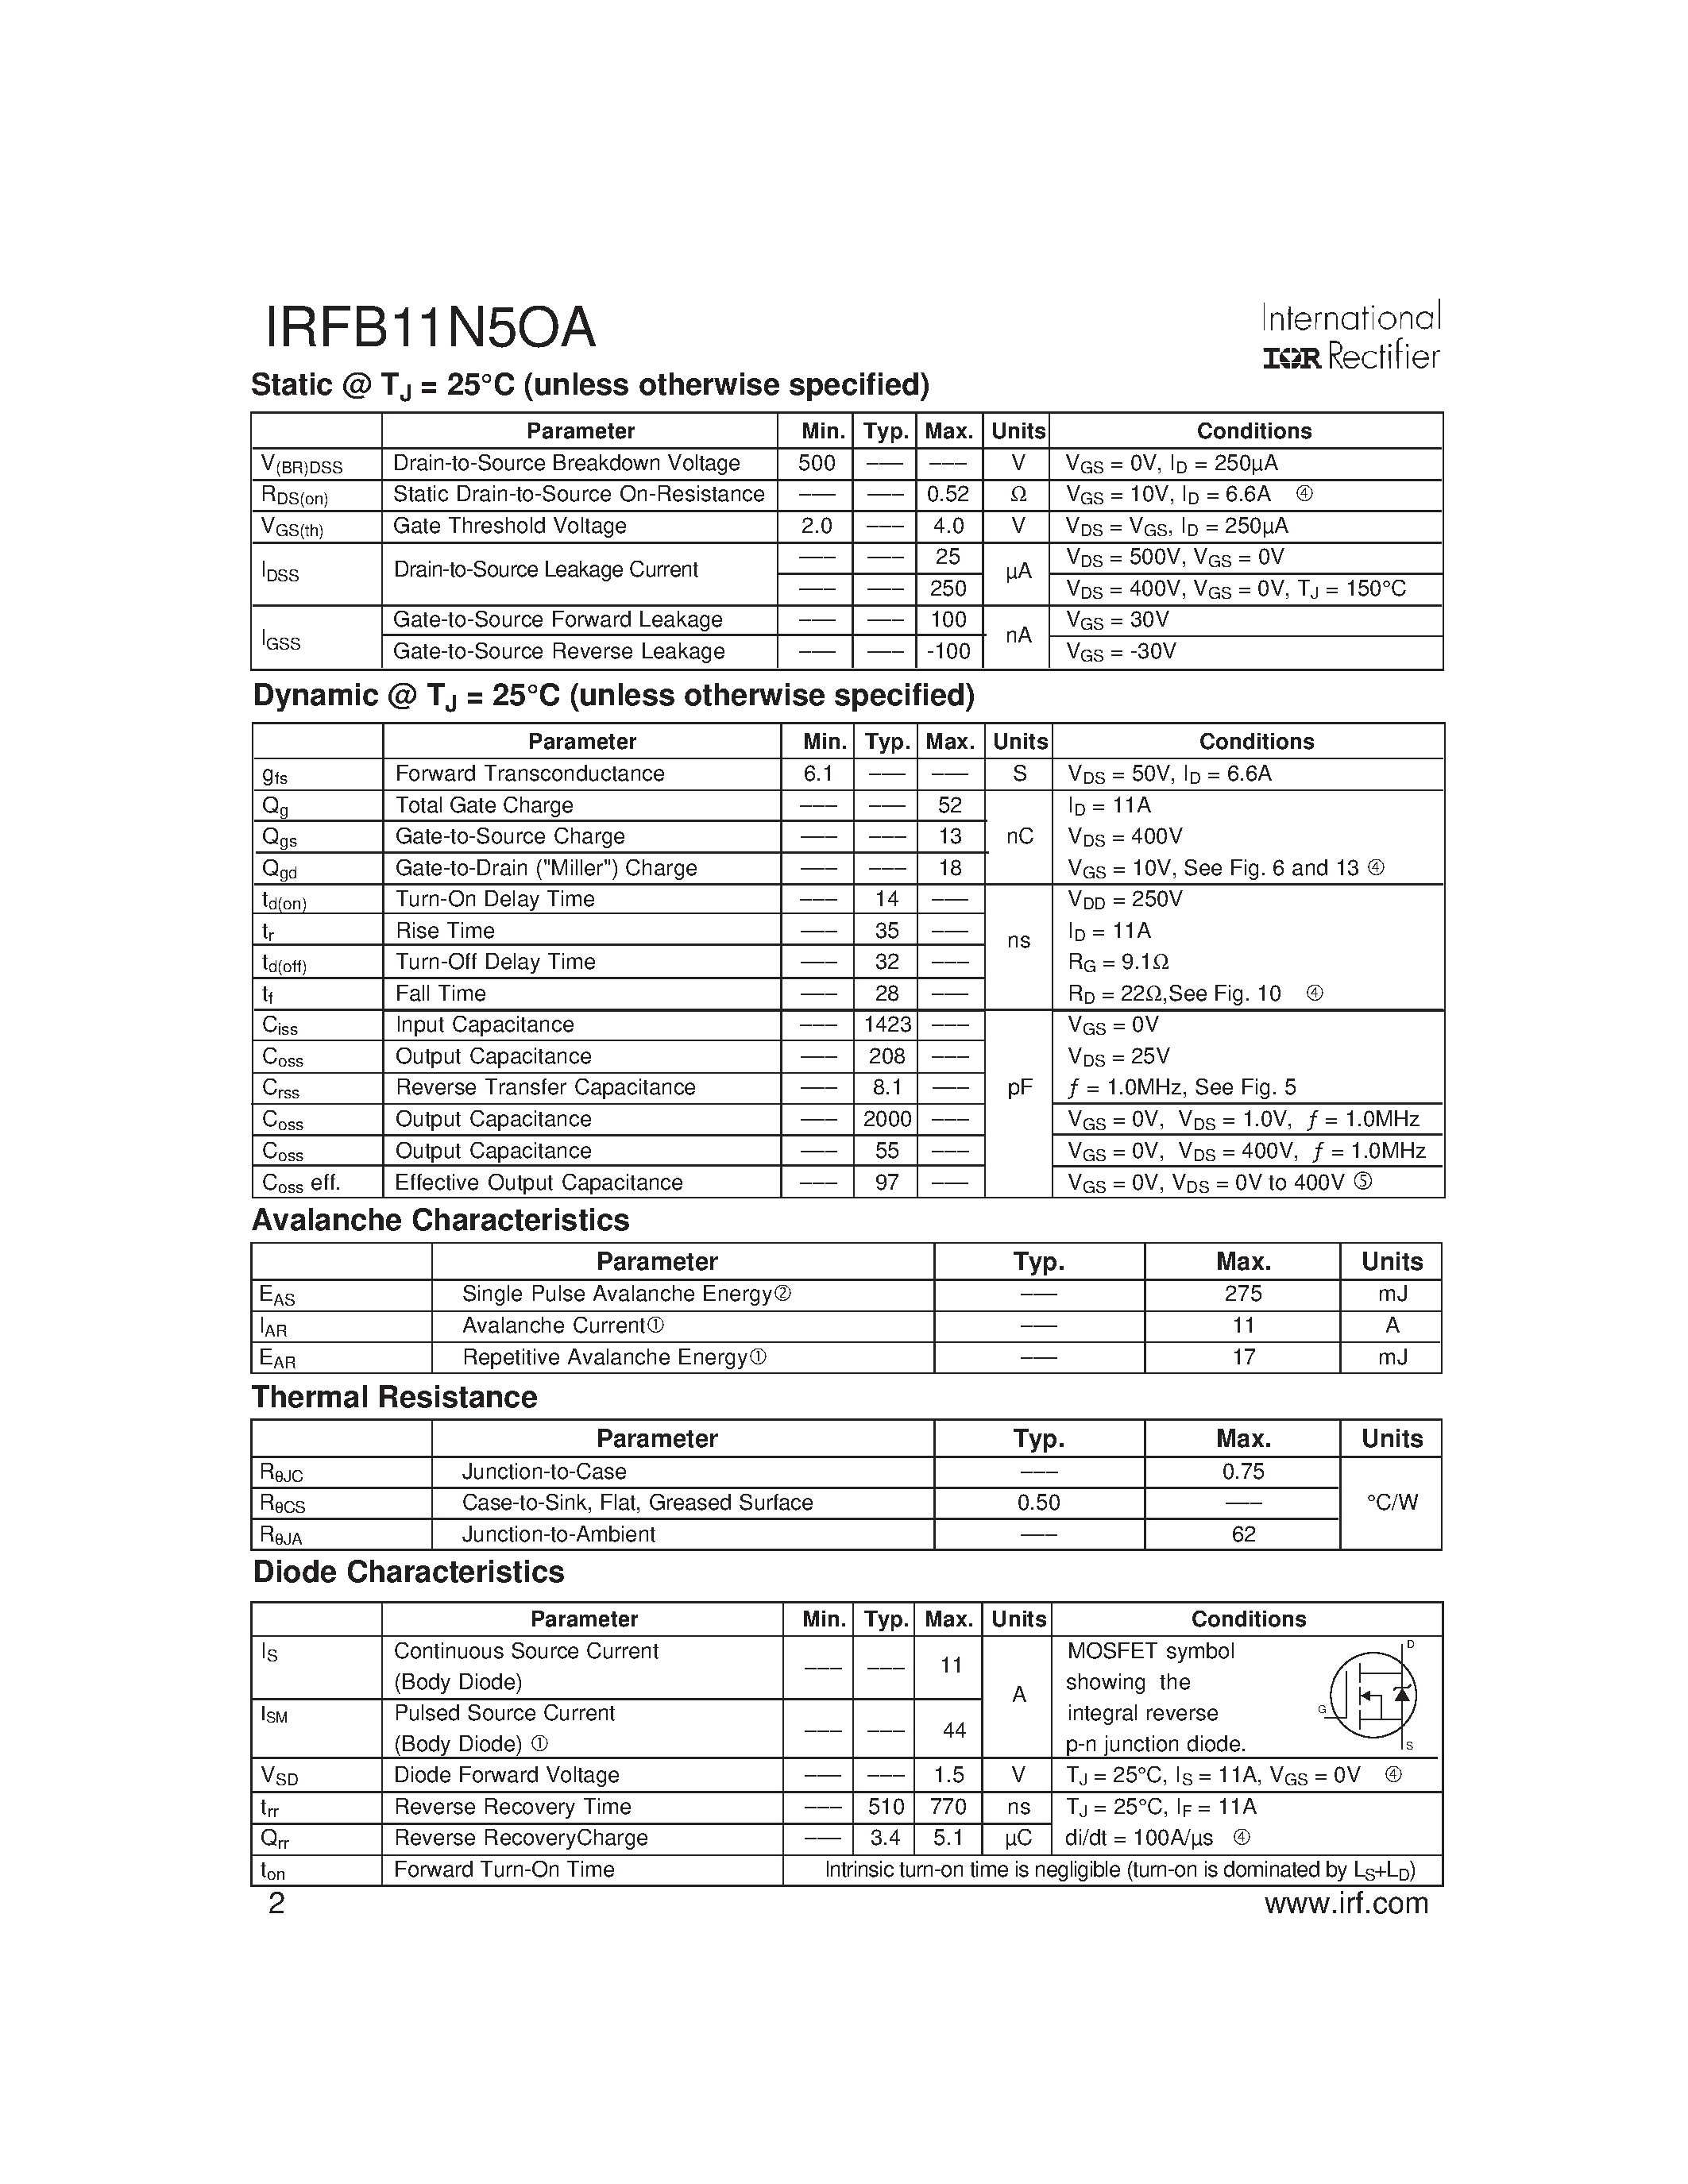 Datasheet FB11N50A - Search -----> IRFB11N50A page 2